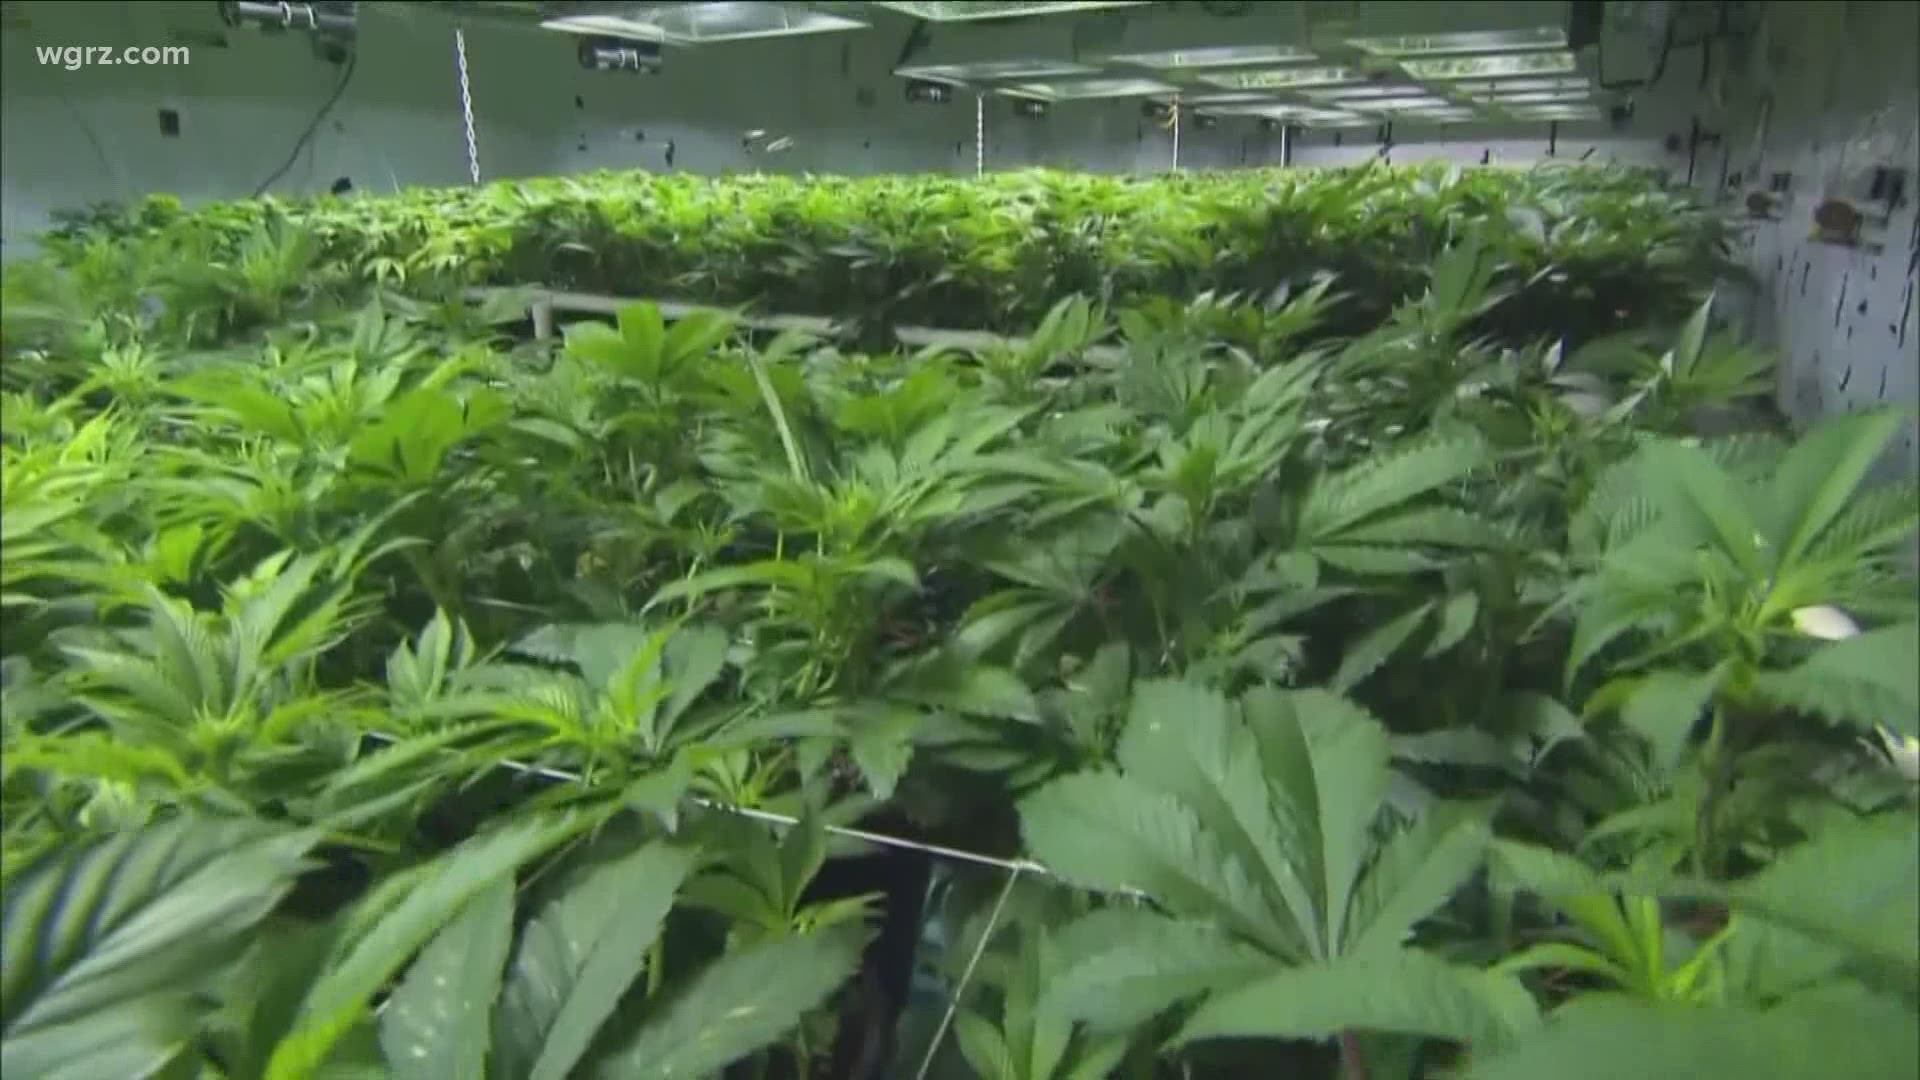 Lawmakers in Albany say they're extremely close to a deal on legalizing recreational marijuana.
But the State Parent Teacher Association is standing firm against it.